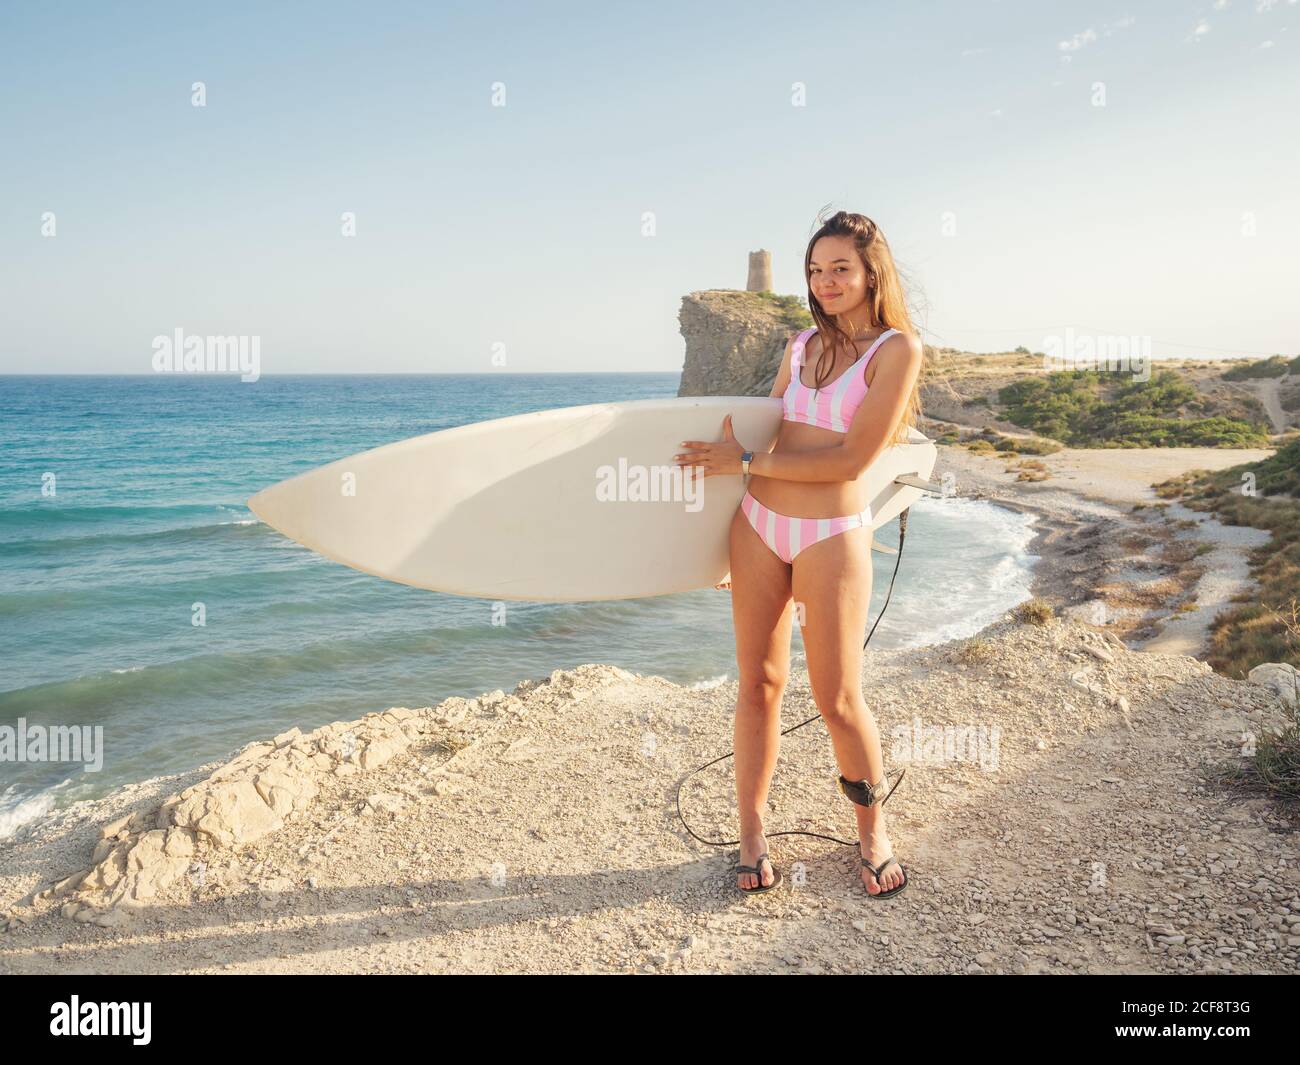 Athletic tanned Woman going to surf raising surfboard high and looking at camera Stock Photo